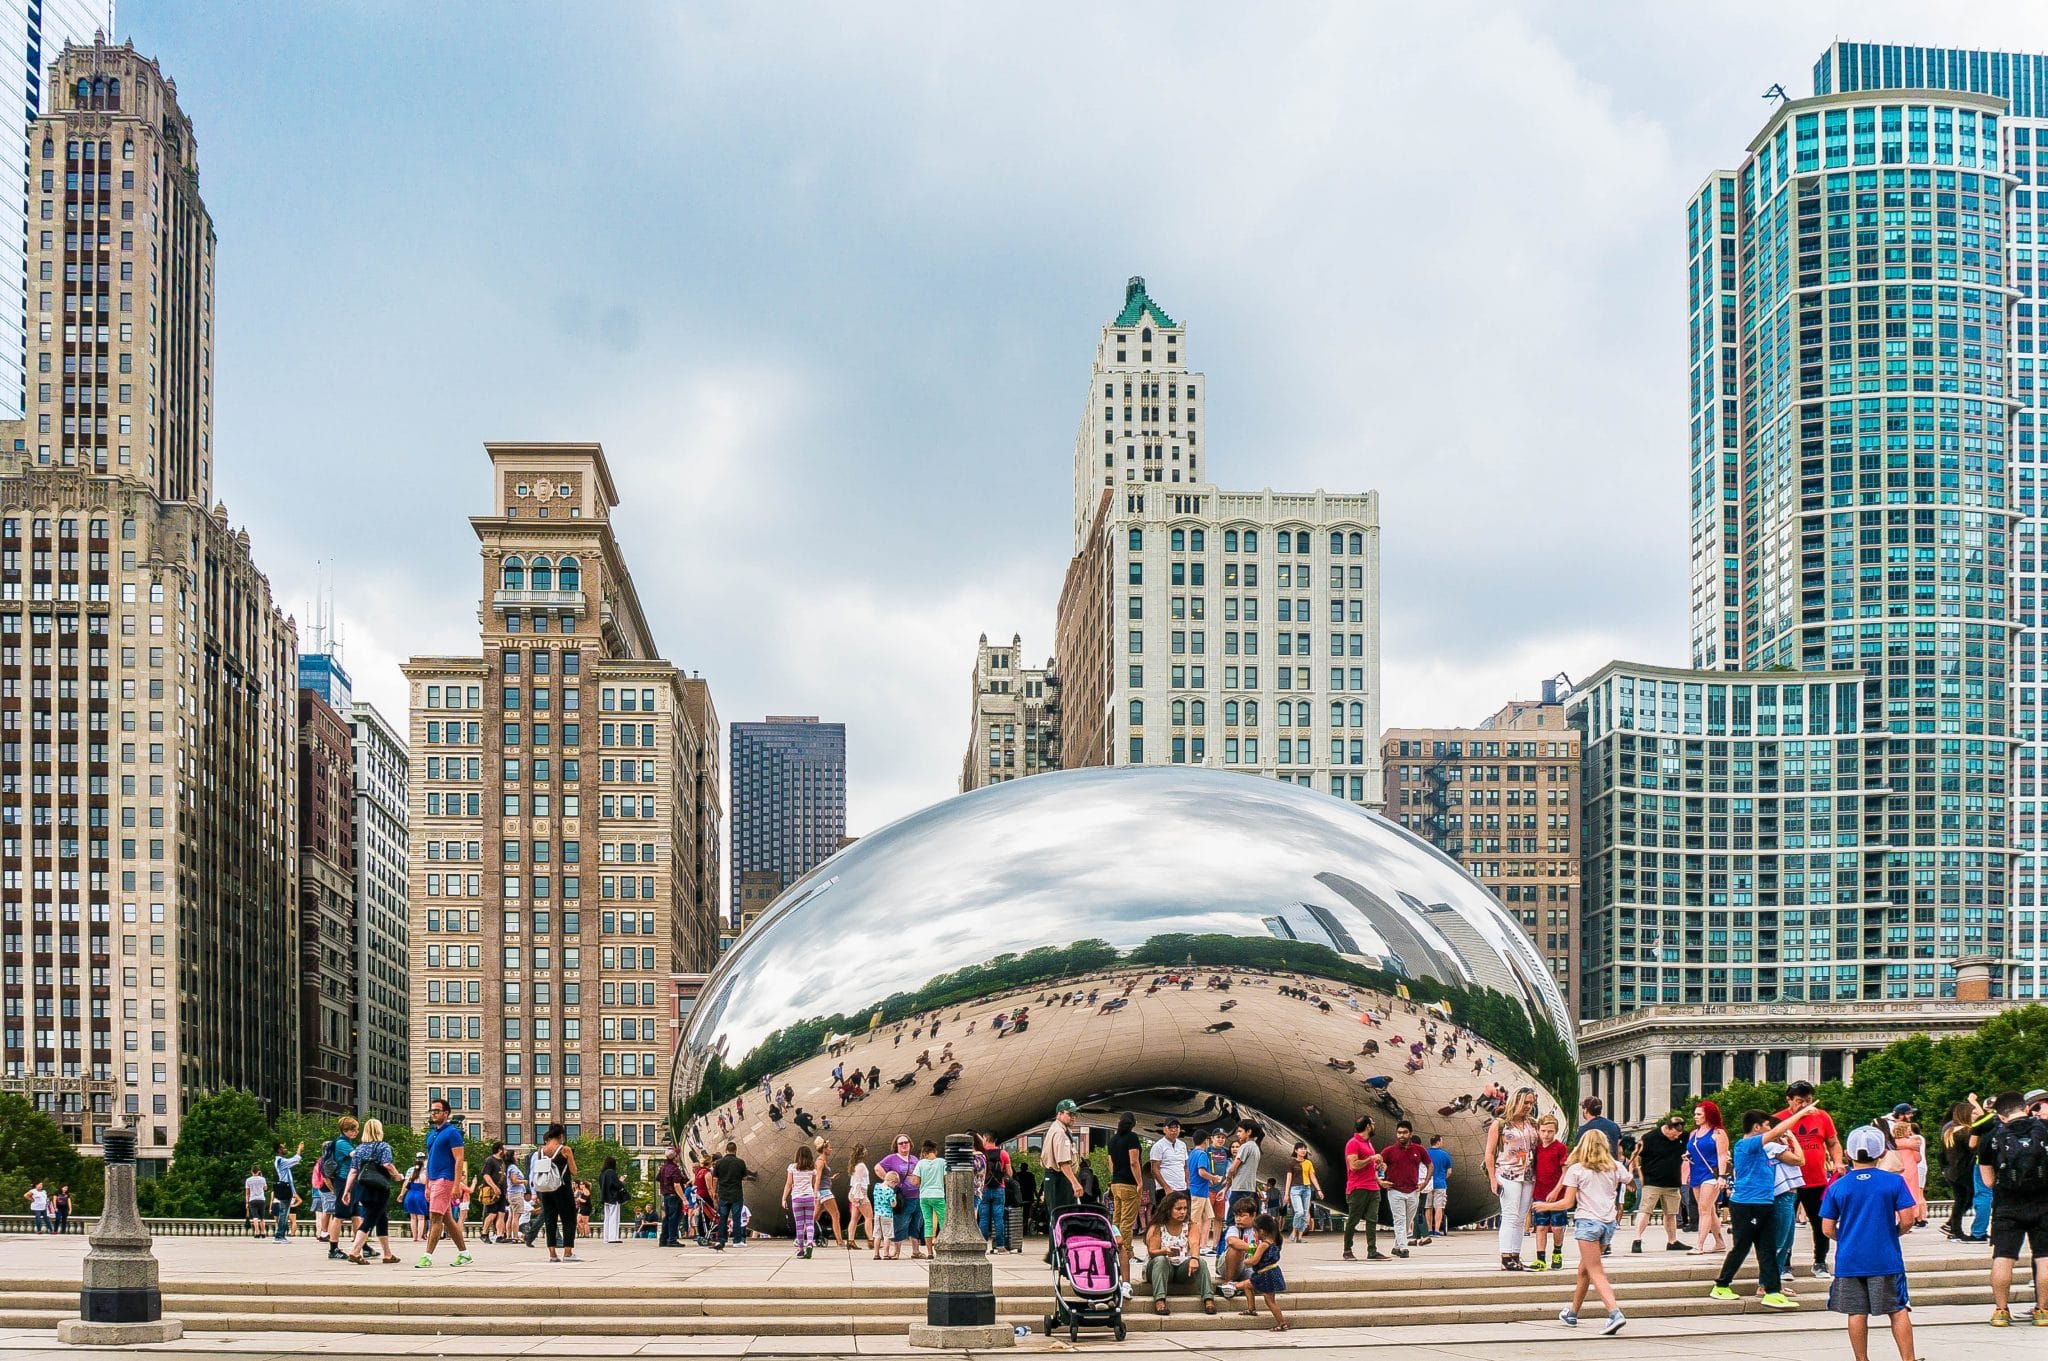 The Bean sculpture set against the city of Chicago